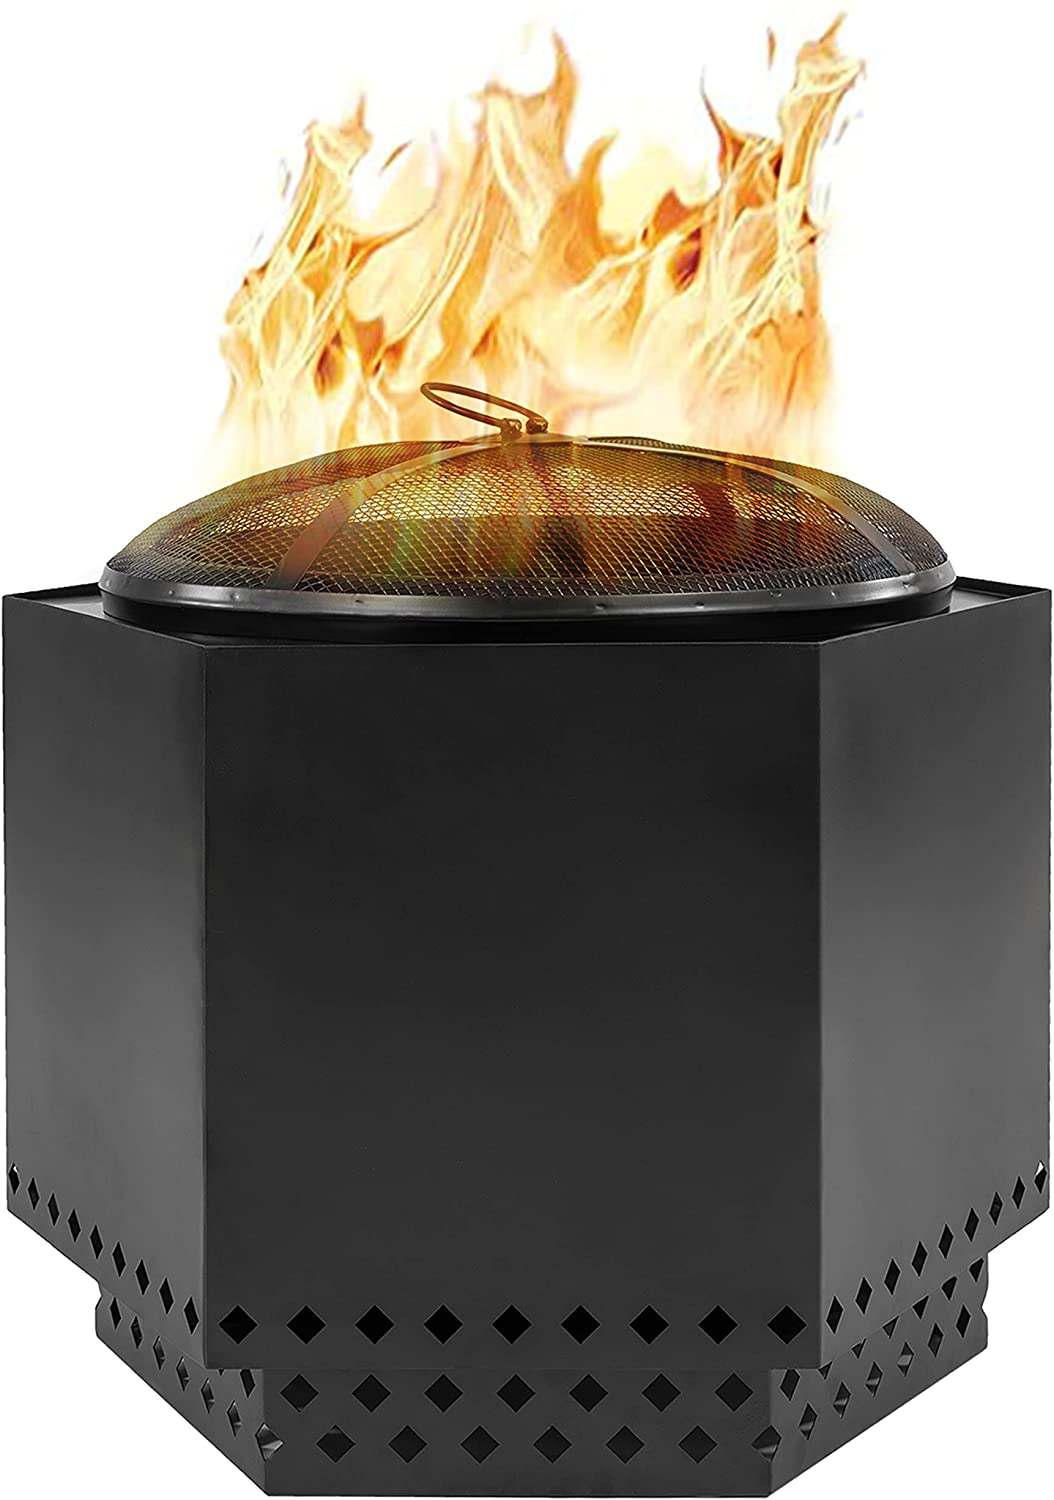 Dragonfire 23.5 Inch Smokeless Wood Burning Outdoor Bonfire Fire Pit Bundle, Includes Stand, Spark Screen, & Waterproof Cover - Great for Camping, Cooking, Tailgating, and Patio, Black